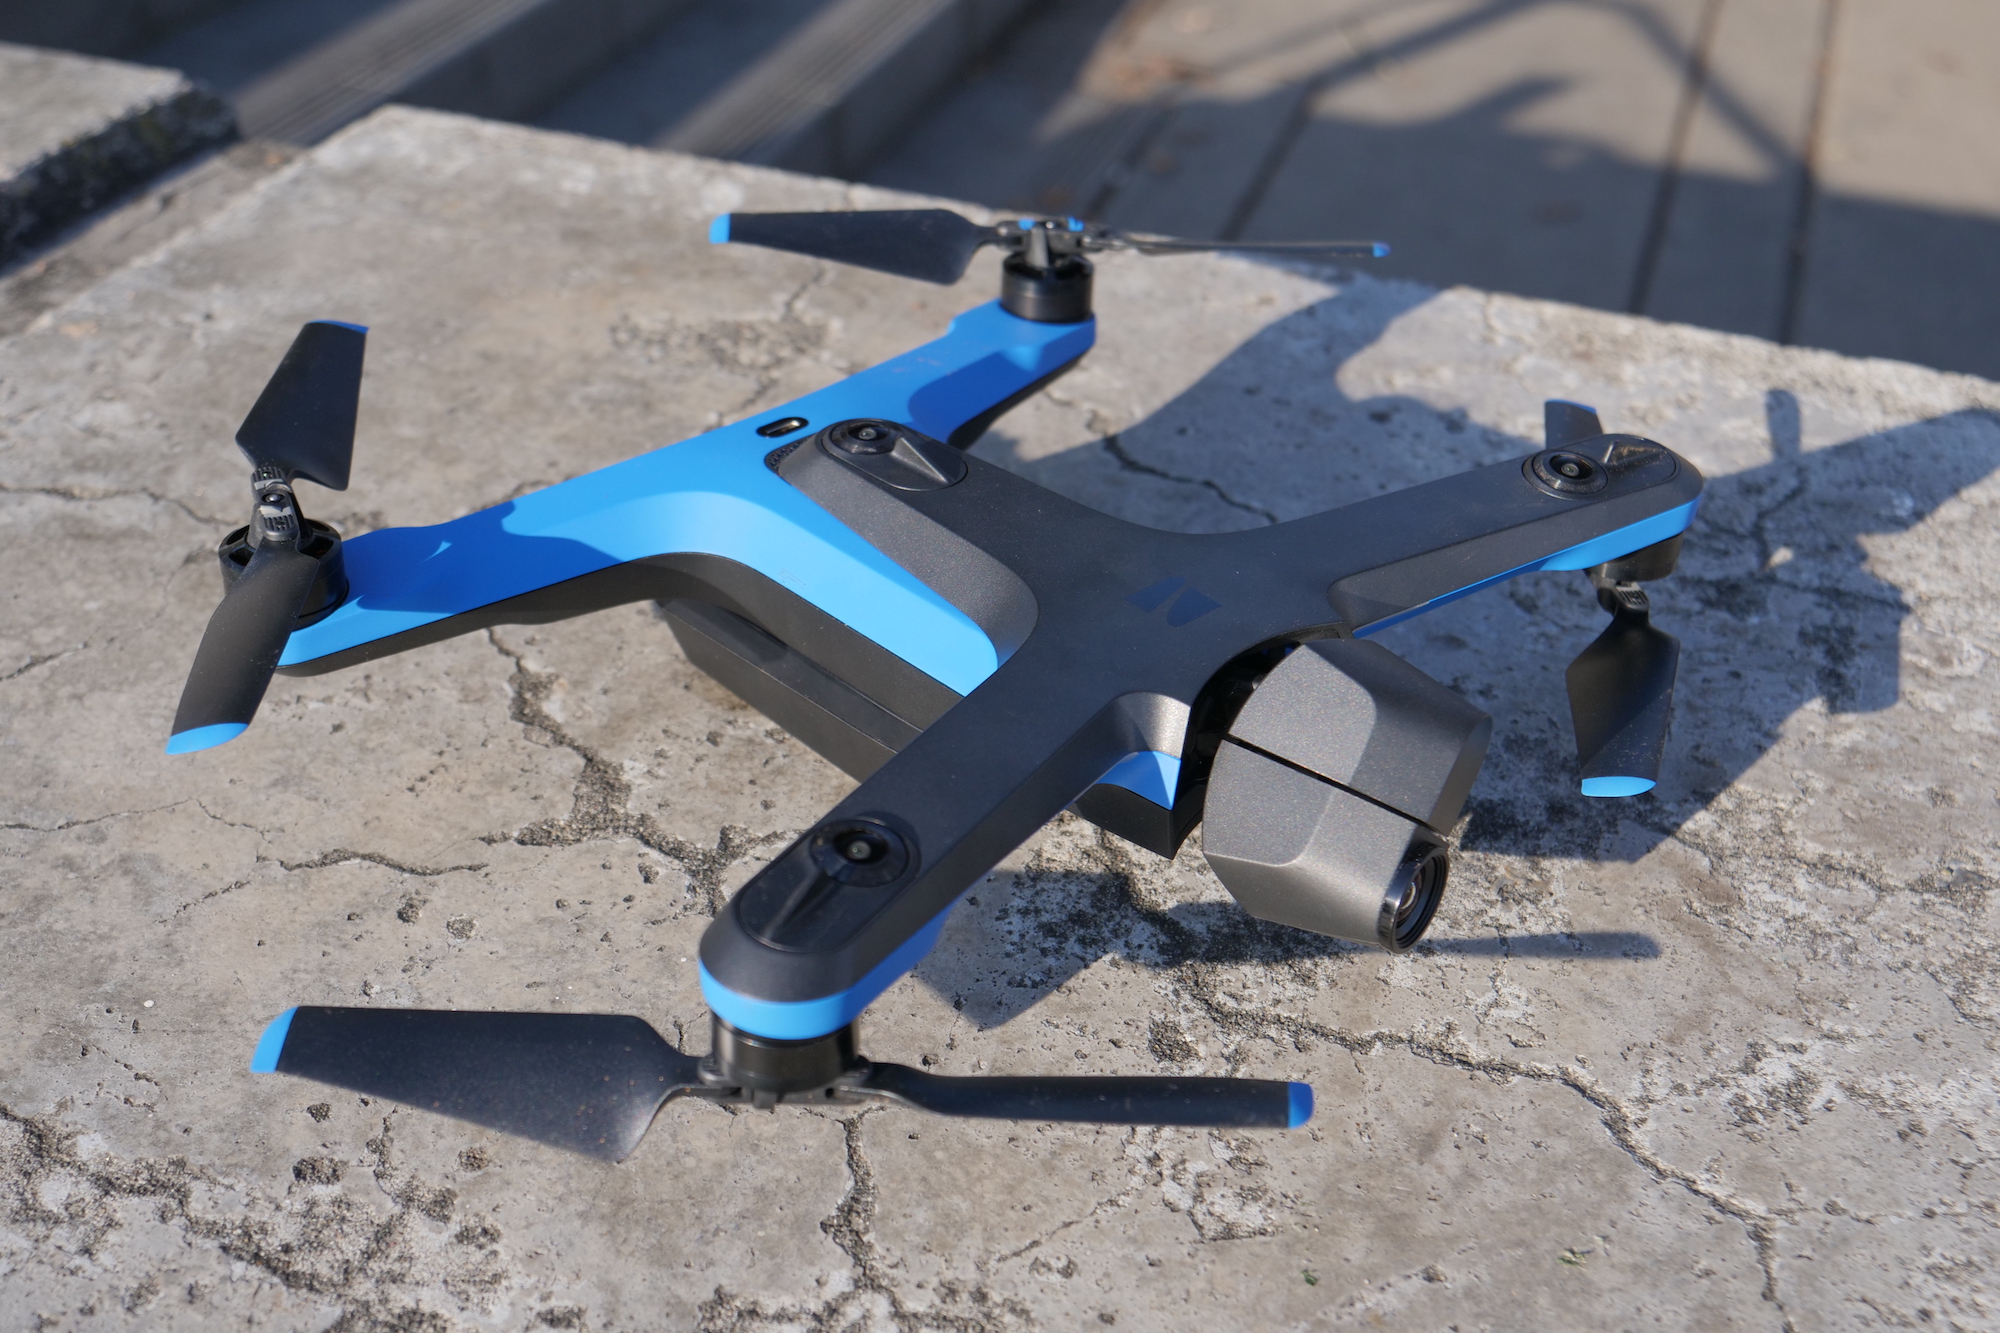 Profit Aftensmad Champagne Skydio 2 Review: A Nearly Uncrashable Drone That Follows You Anywhere |  Digital Trends